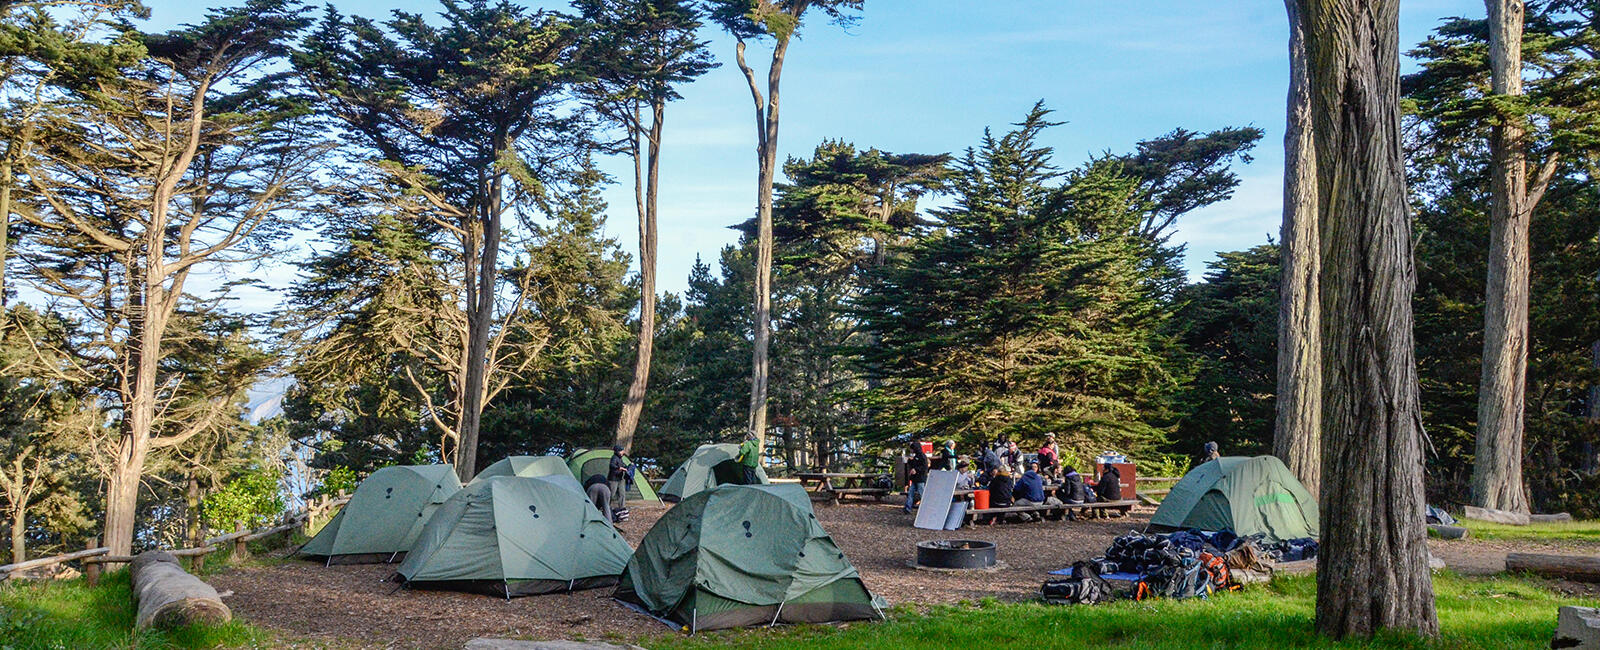 A group of adults sit outside on a sunny day eating lunch at a picnic bench under eucalyptus trees while surrounded by camping tents